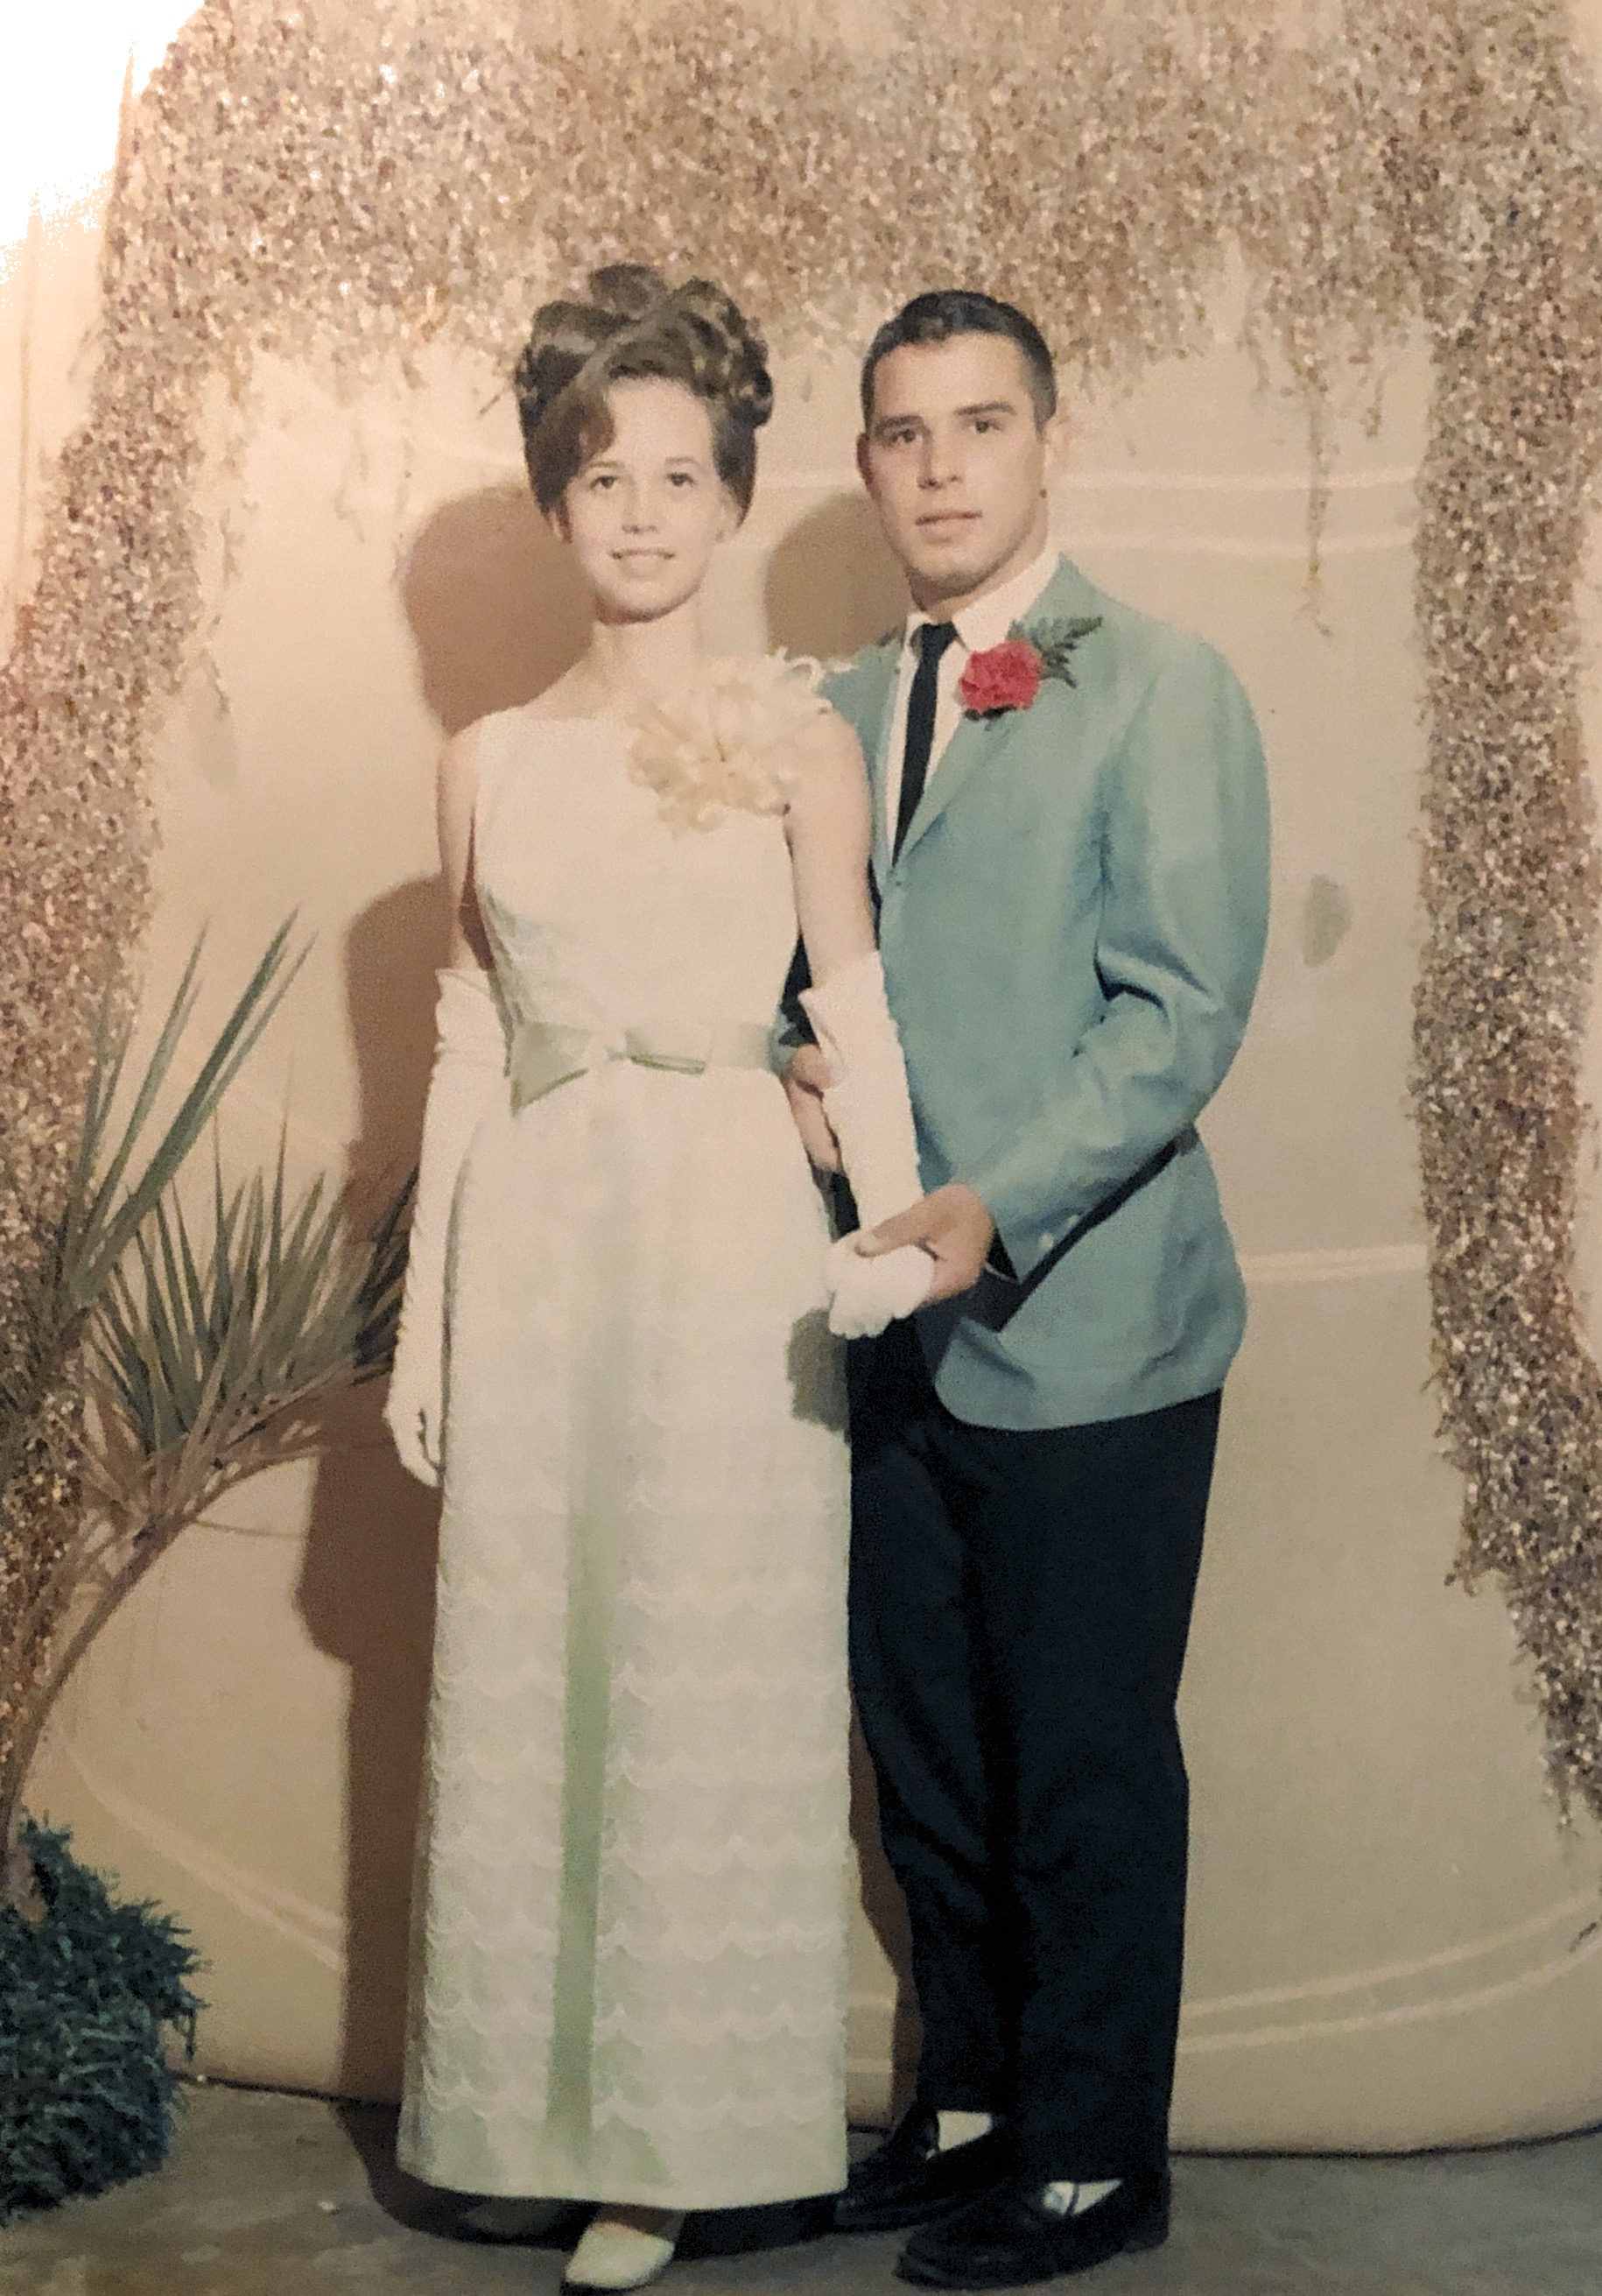 Johnny Taylor and John Jacobs at the senior prom in Nashville Georgia what year in 1966